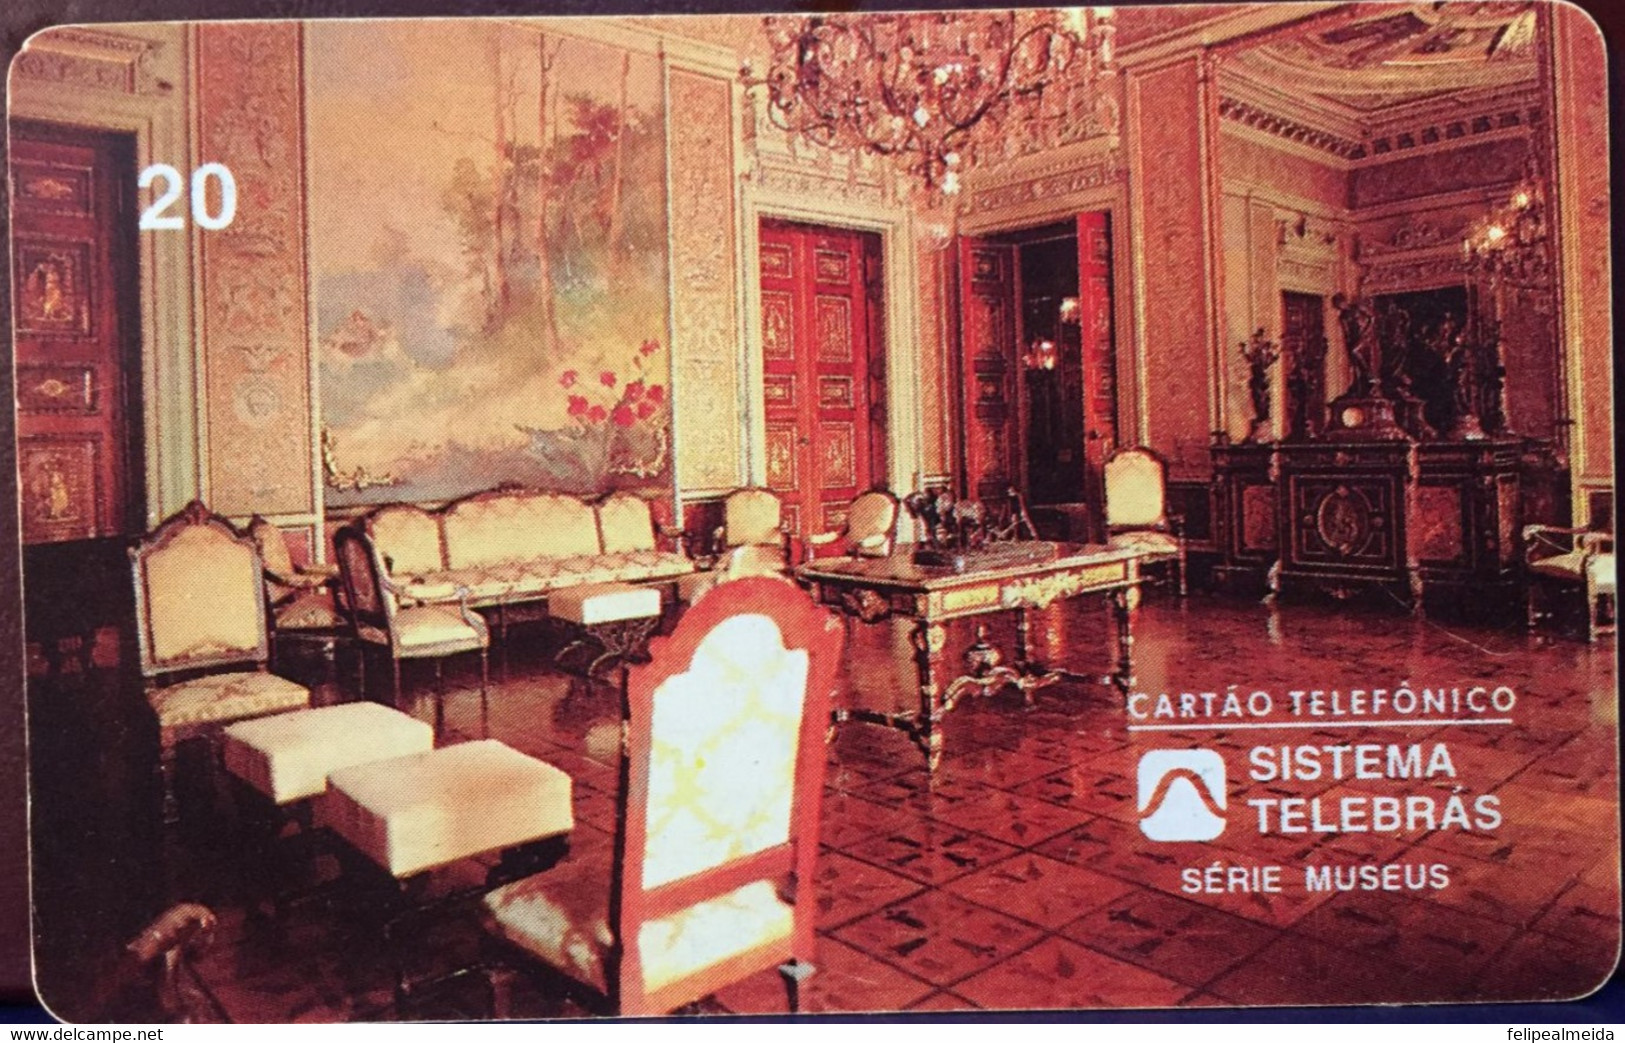 Phone Card Manufactured By Telebras In 1996 - Series Museums - Museum Of The Republic Of Rio De Janeiro - Venetian H - Ontwikkeling